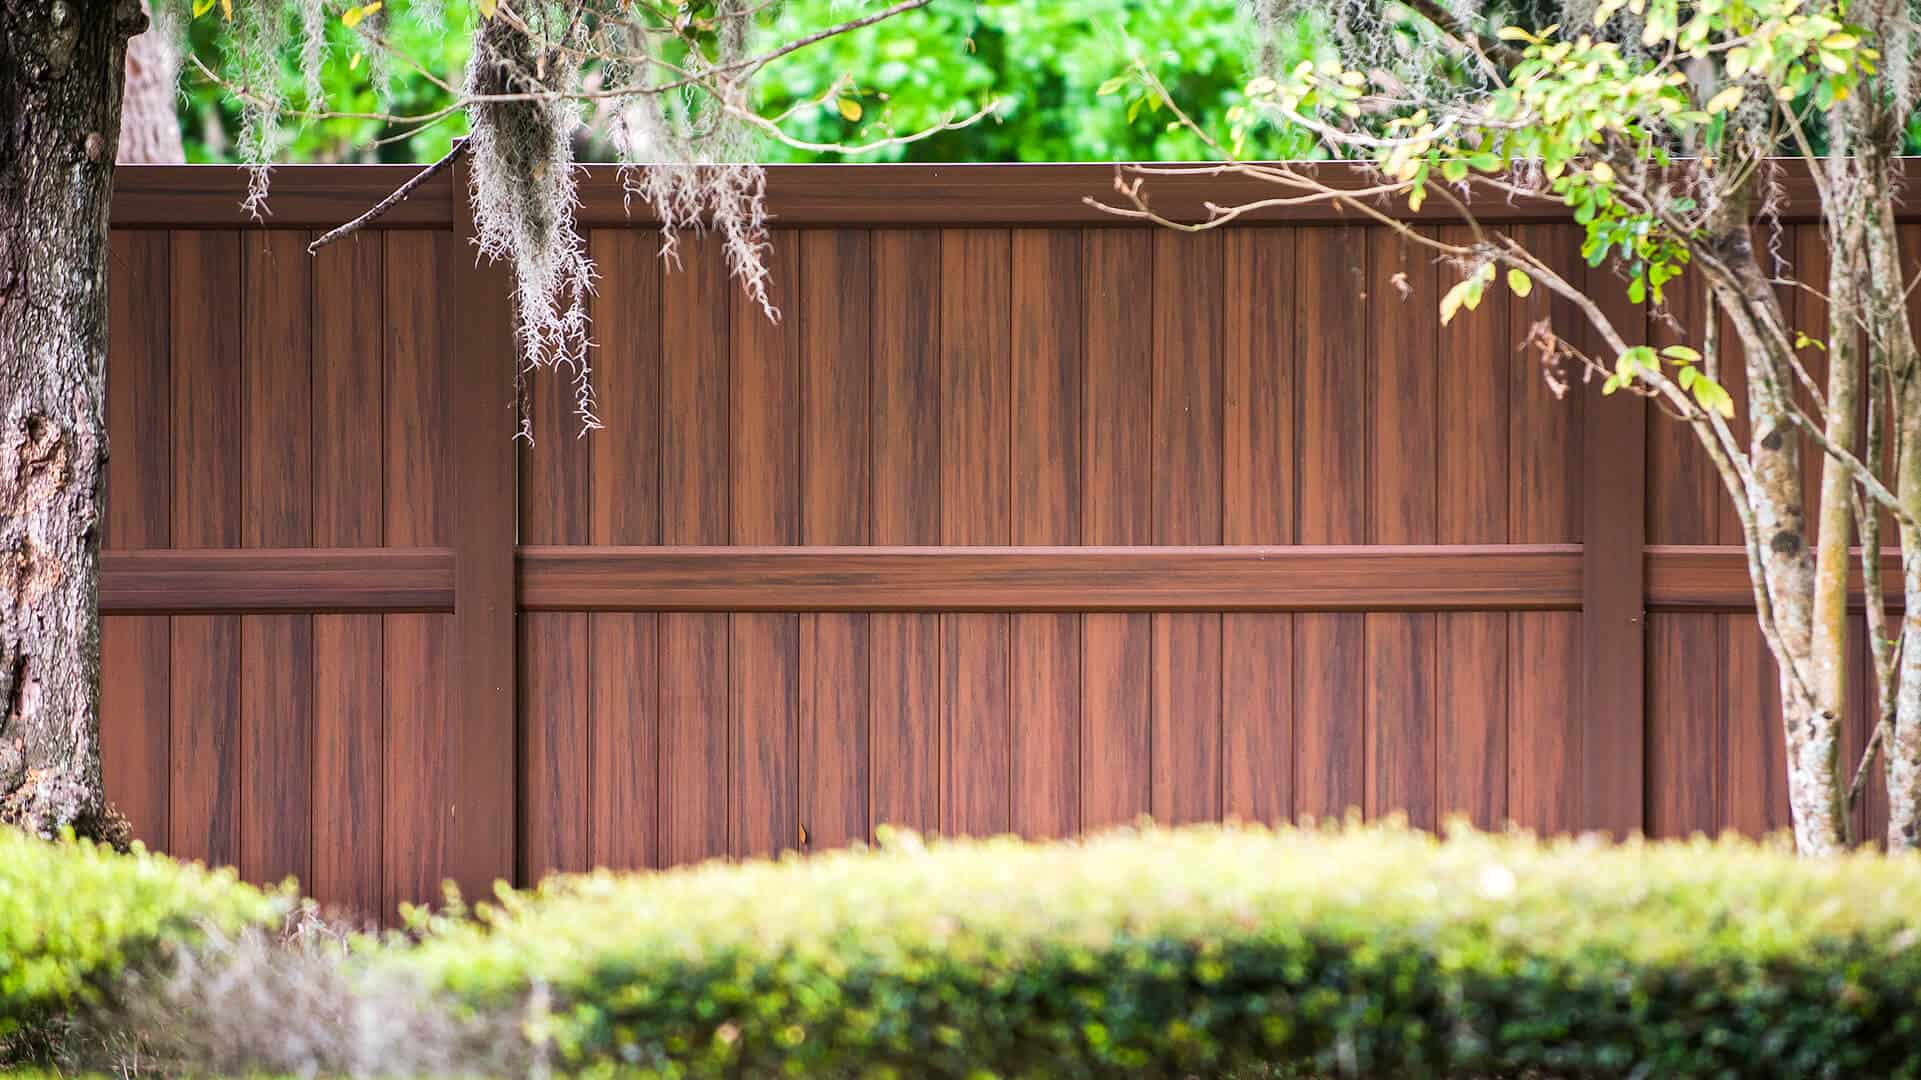 Which Cape Coral Fence Company Offers the Best Fence Options for My Yard?